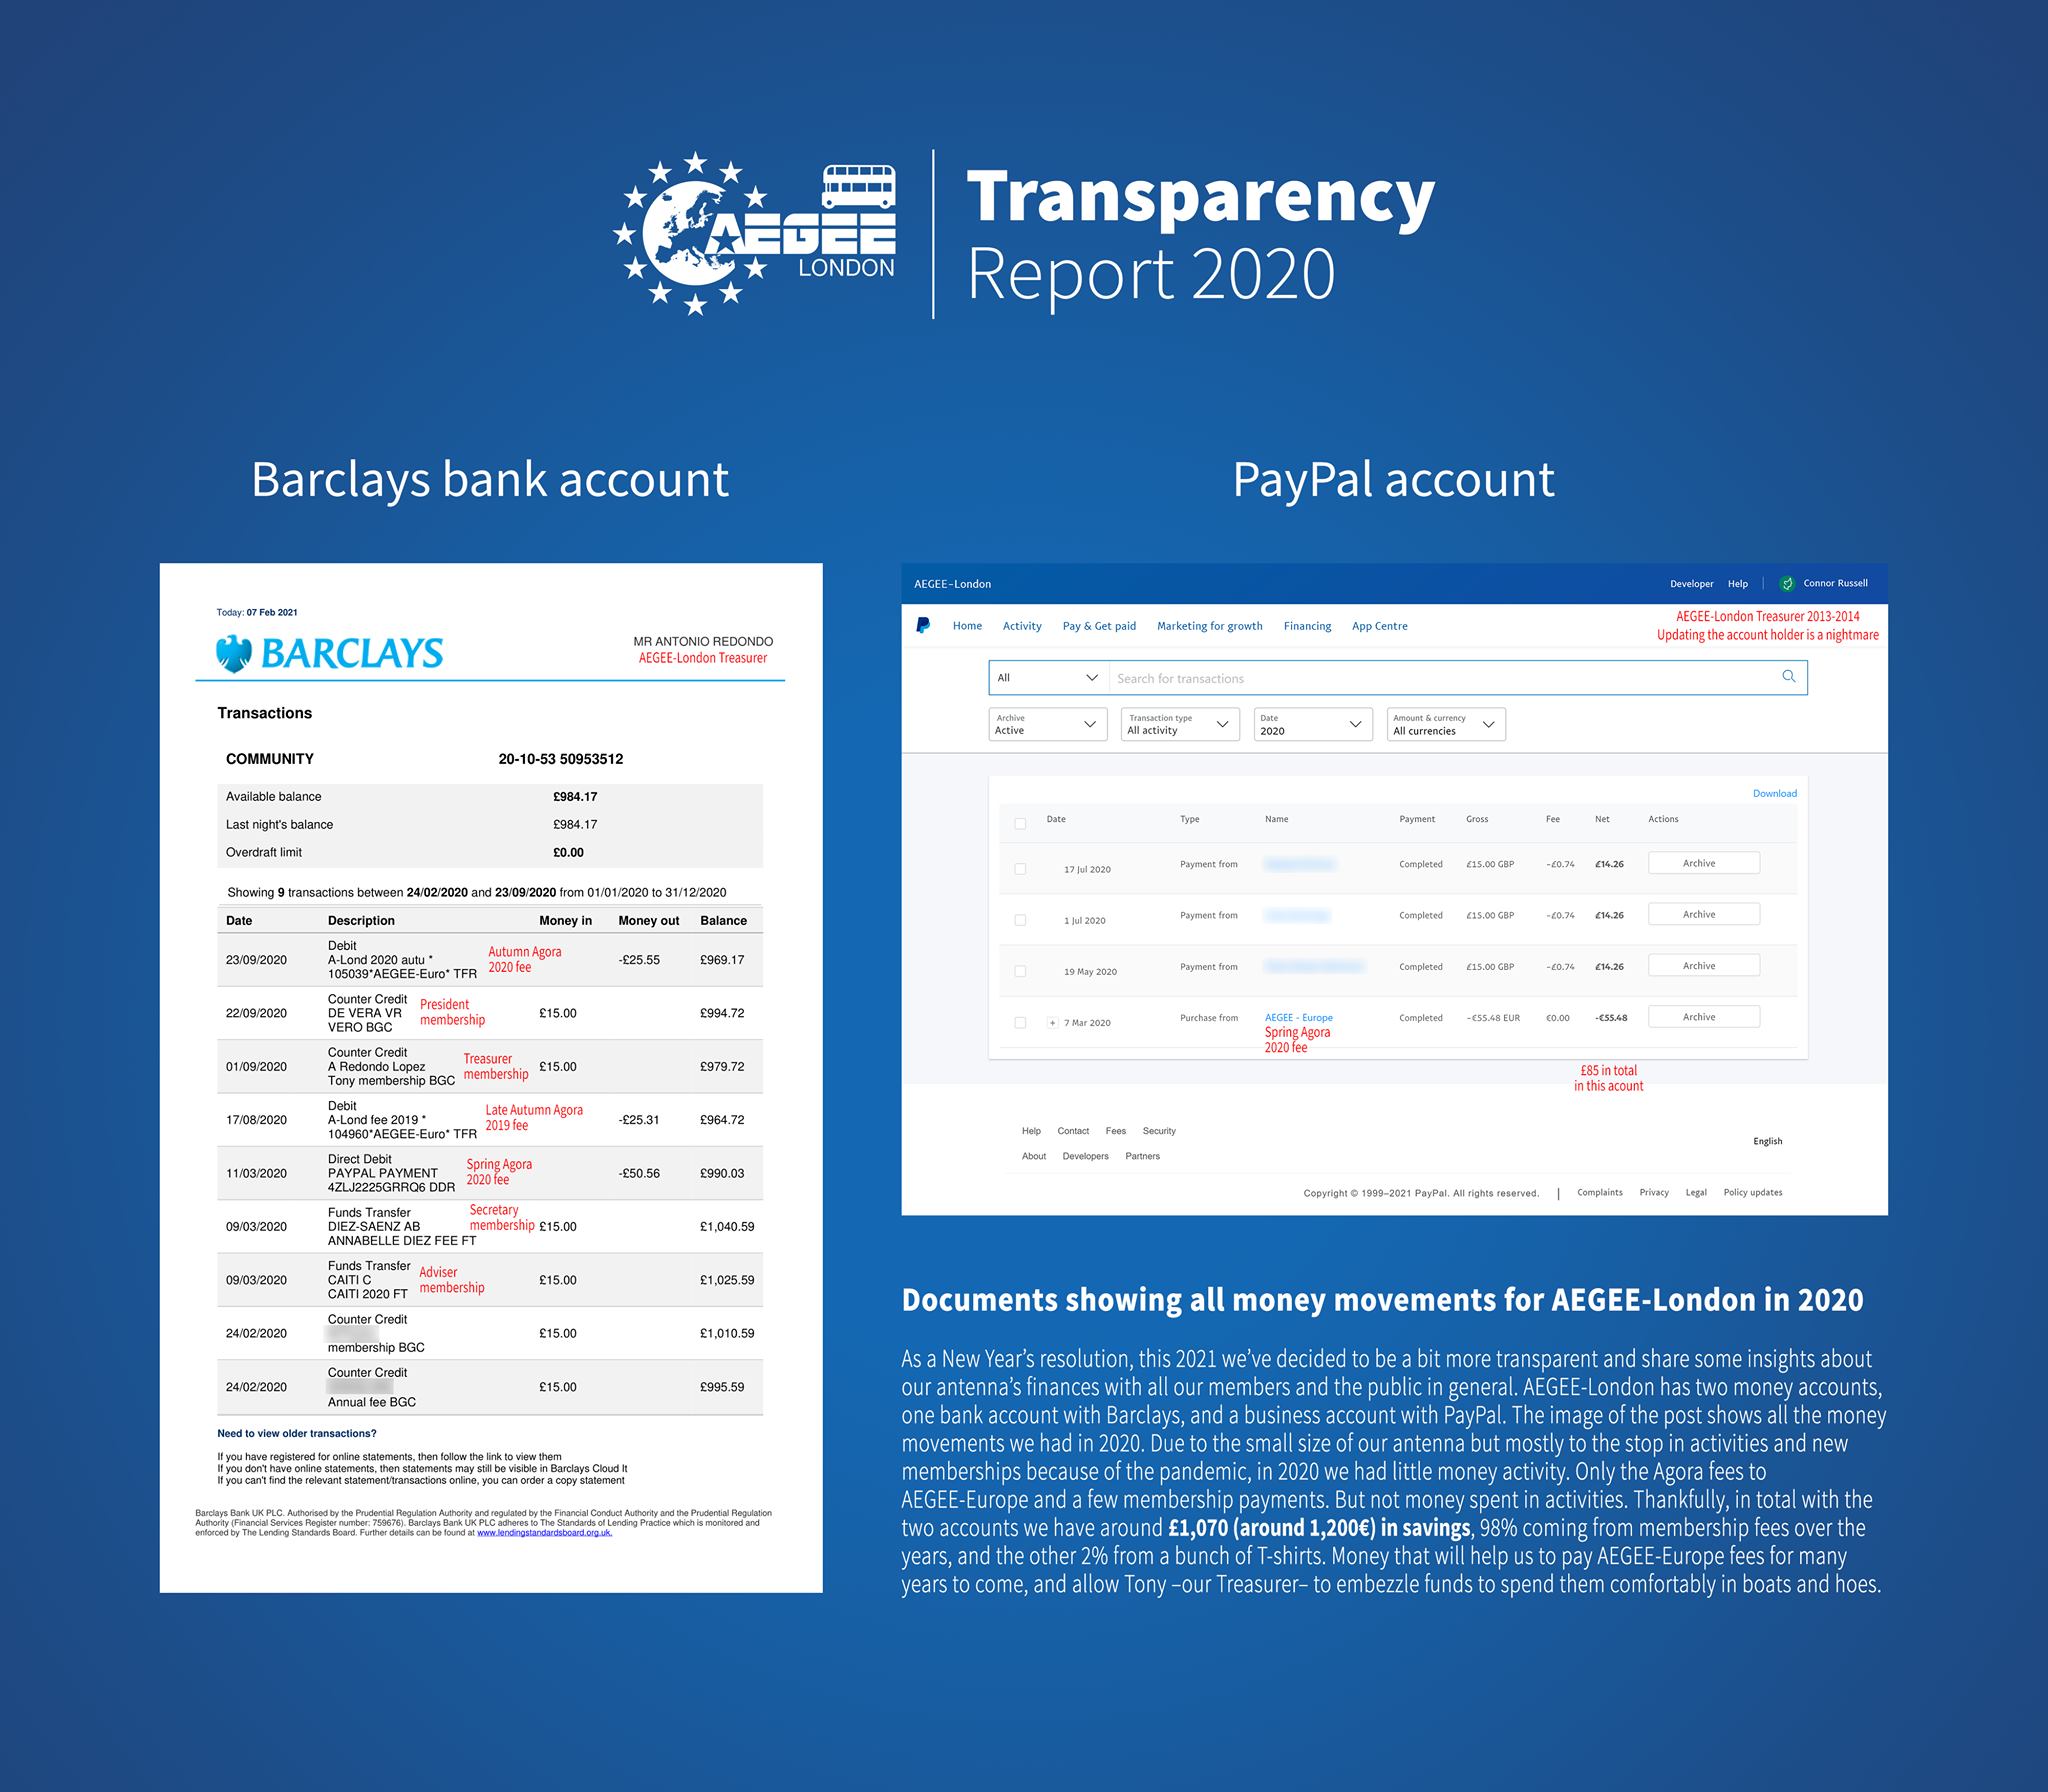 AEGEE-London Transparency Report 2020